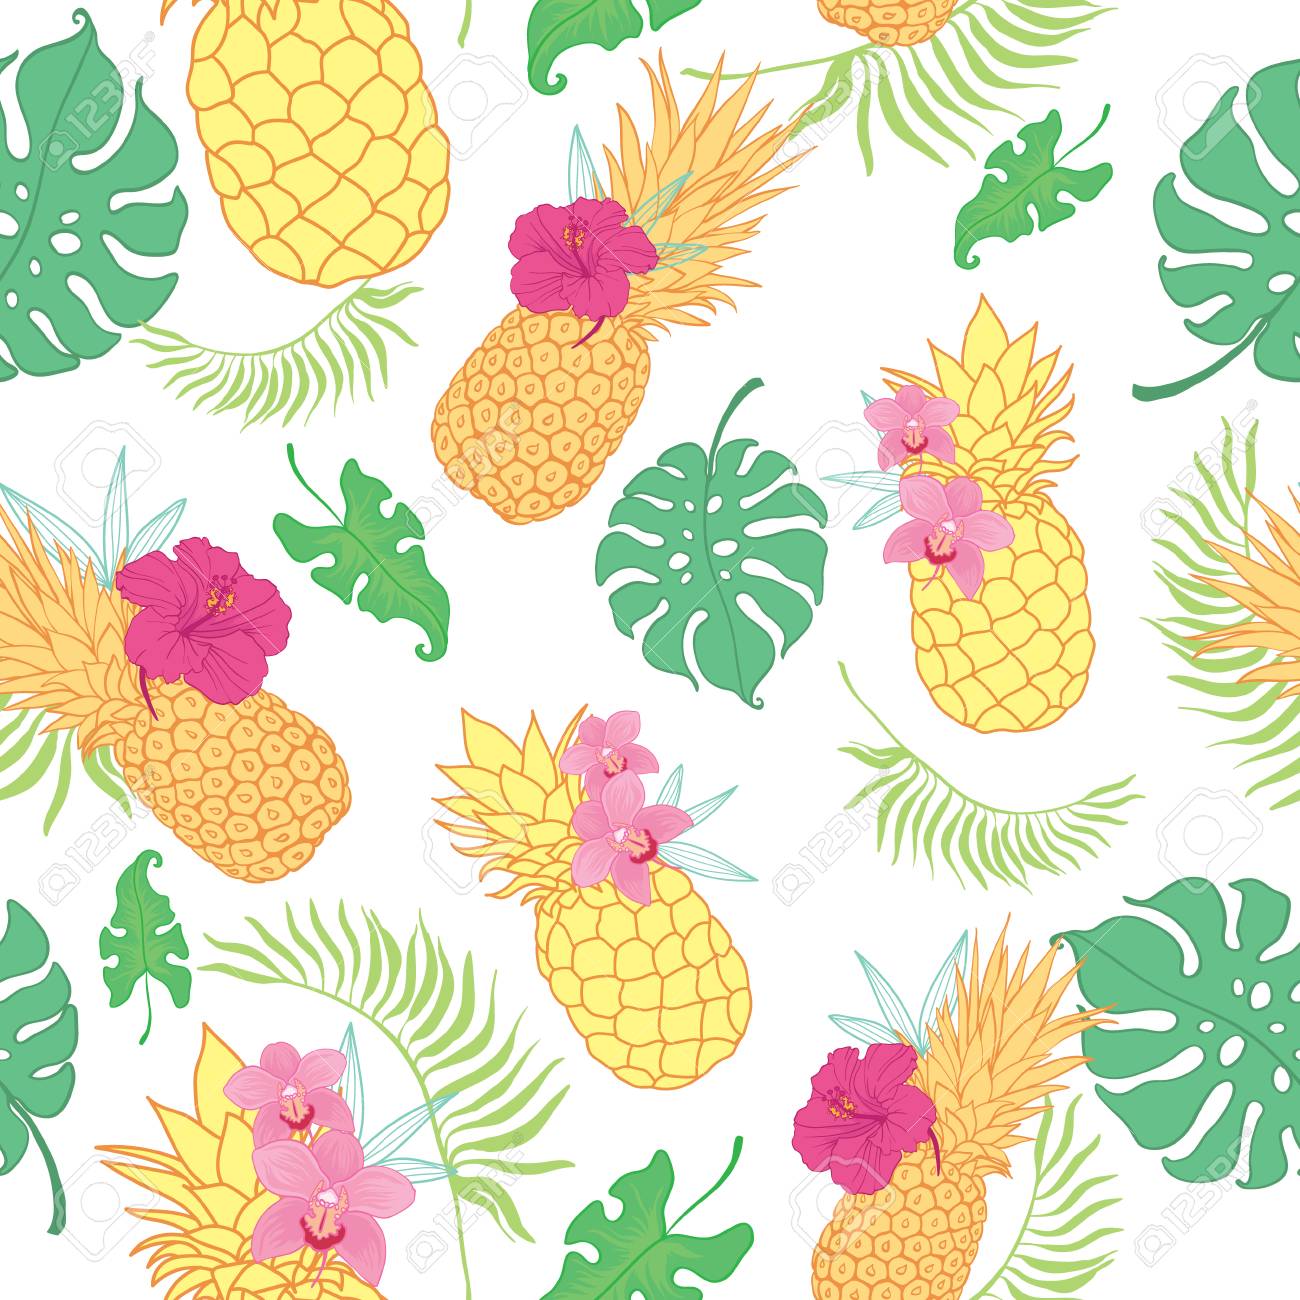 Tropical Pineapples Seamless Repeat Pattern Great For Summer